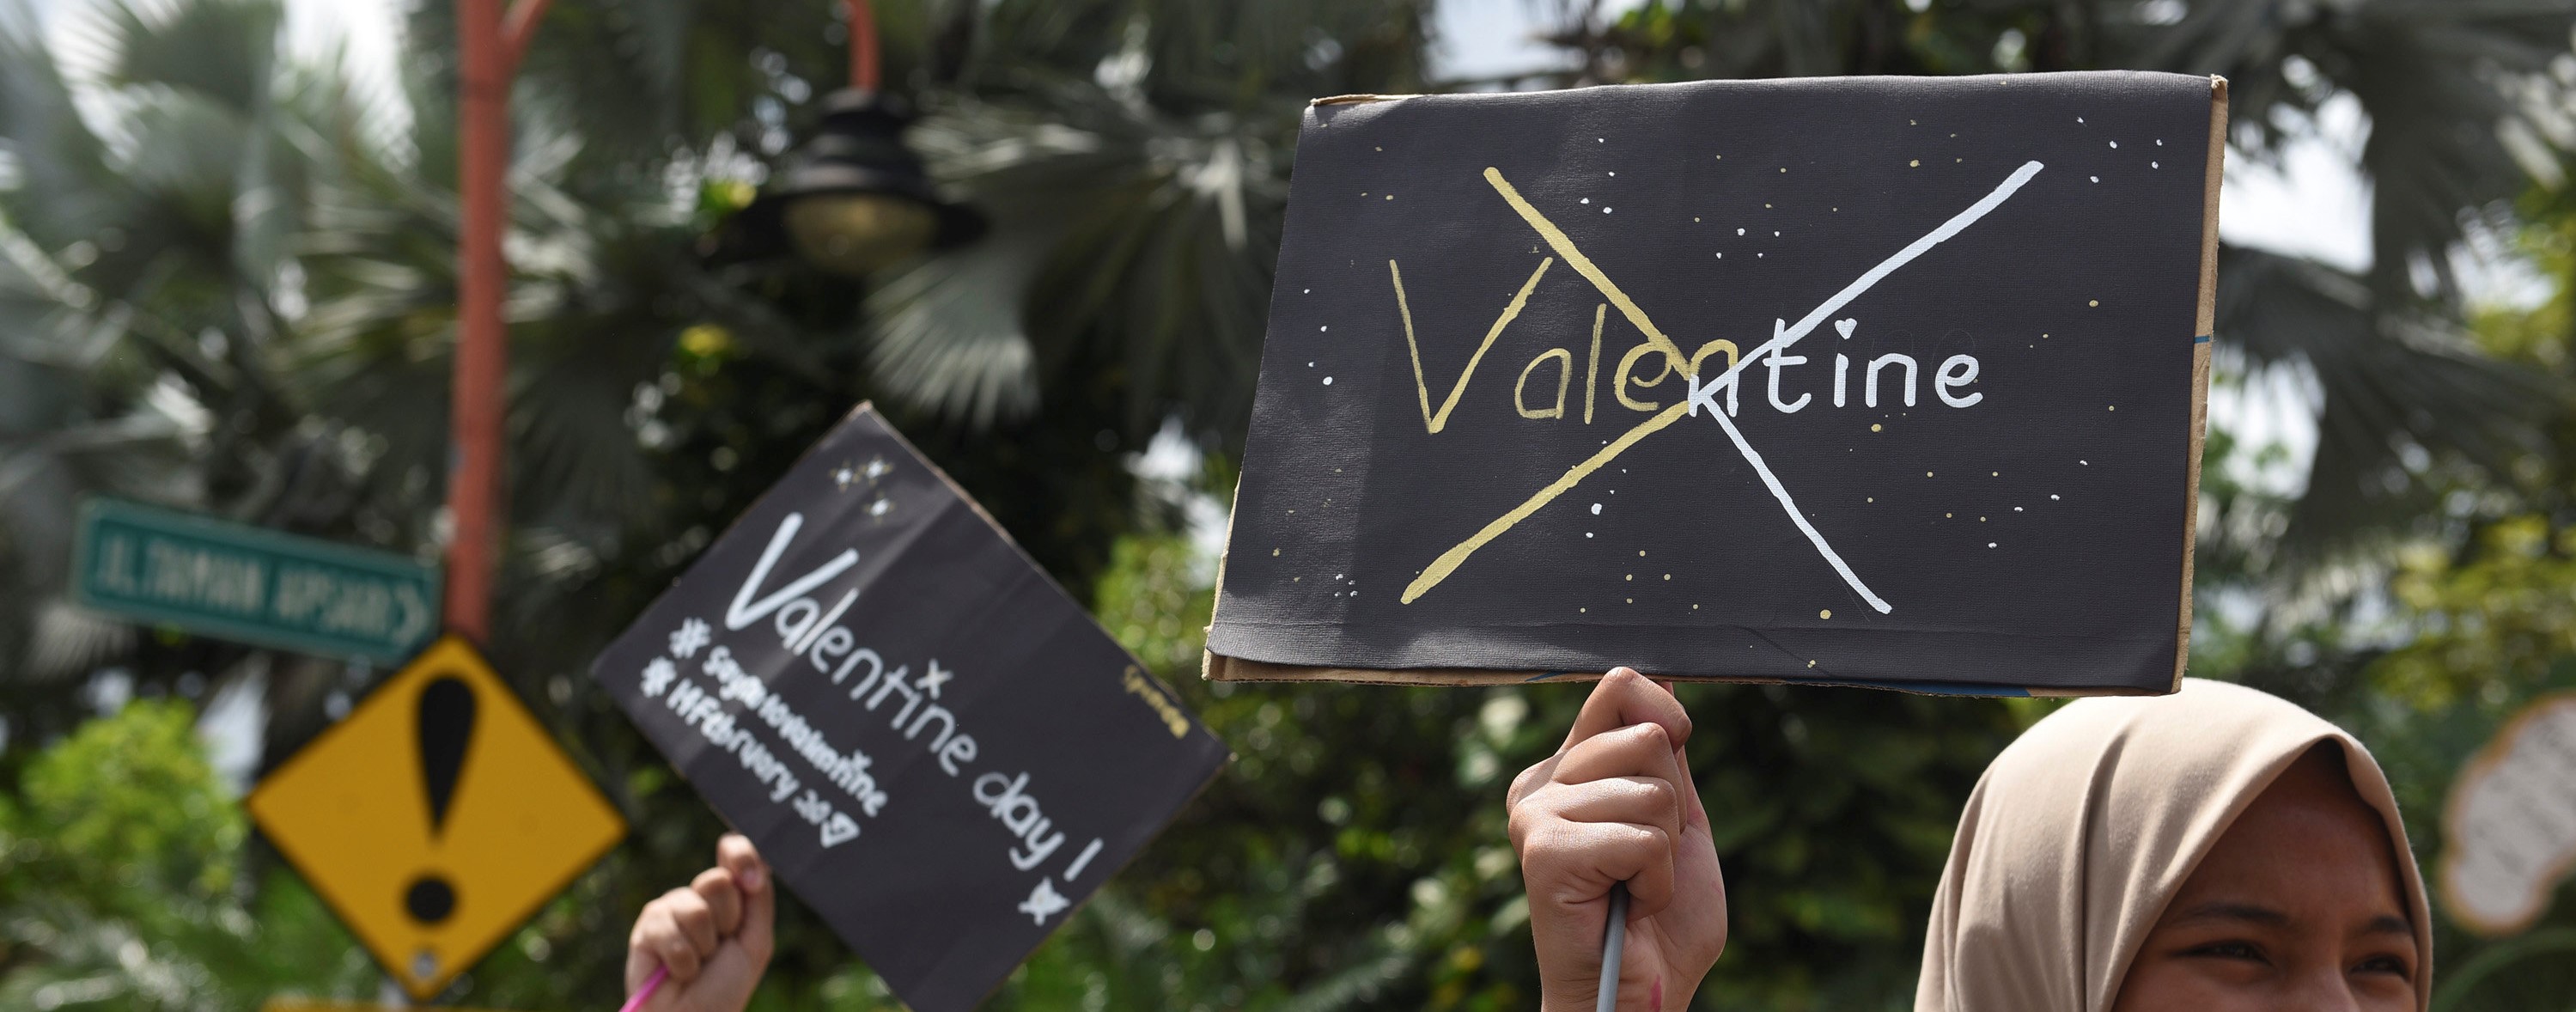 Forbidden love: Valentine's Day ban for some in Muslim-majority Indonesia